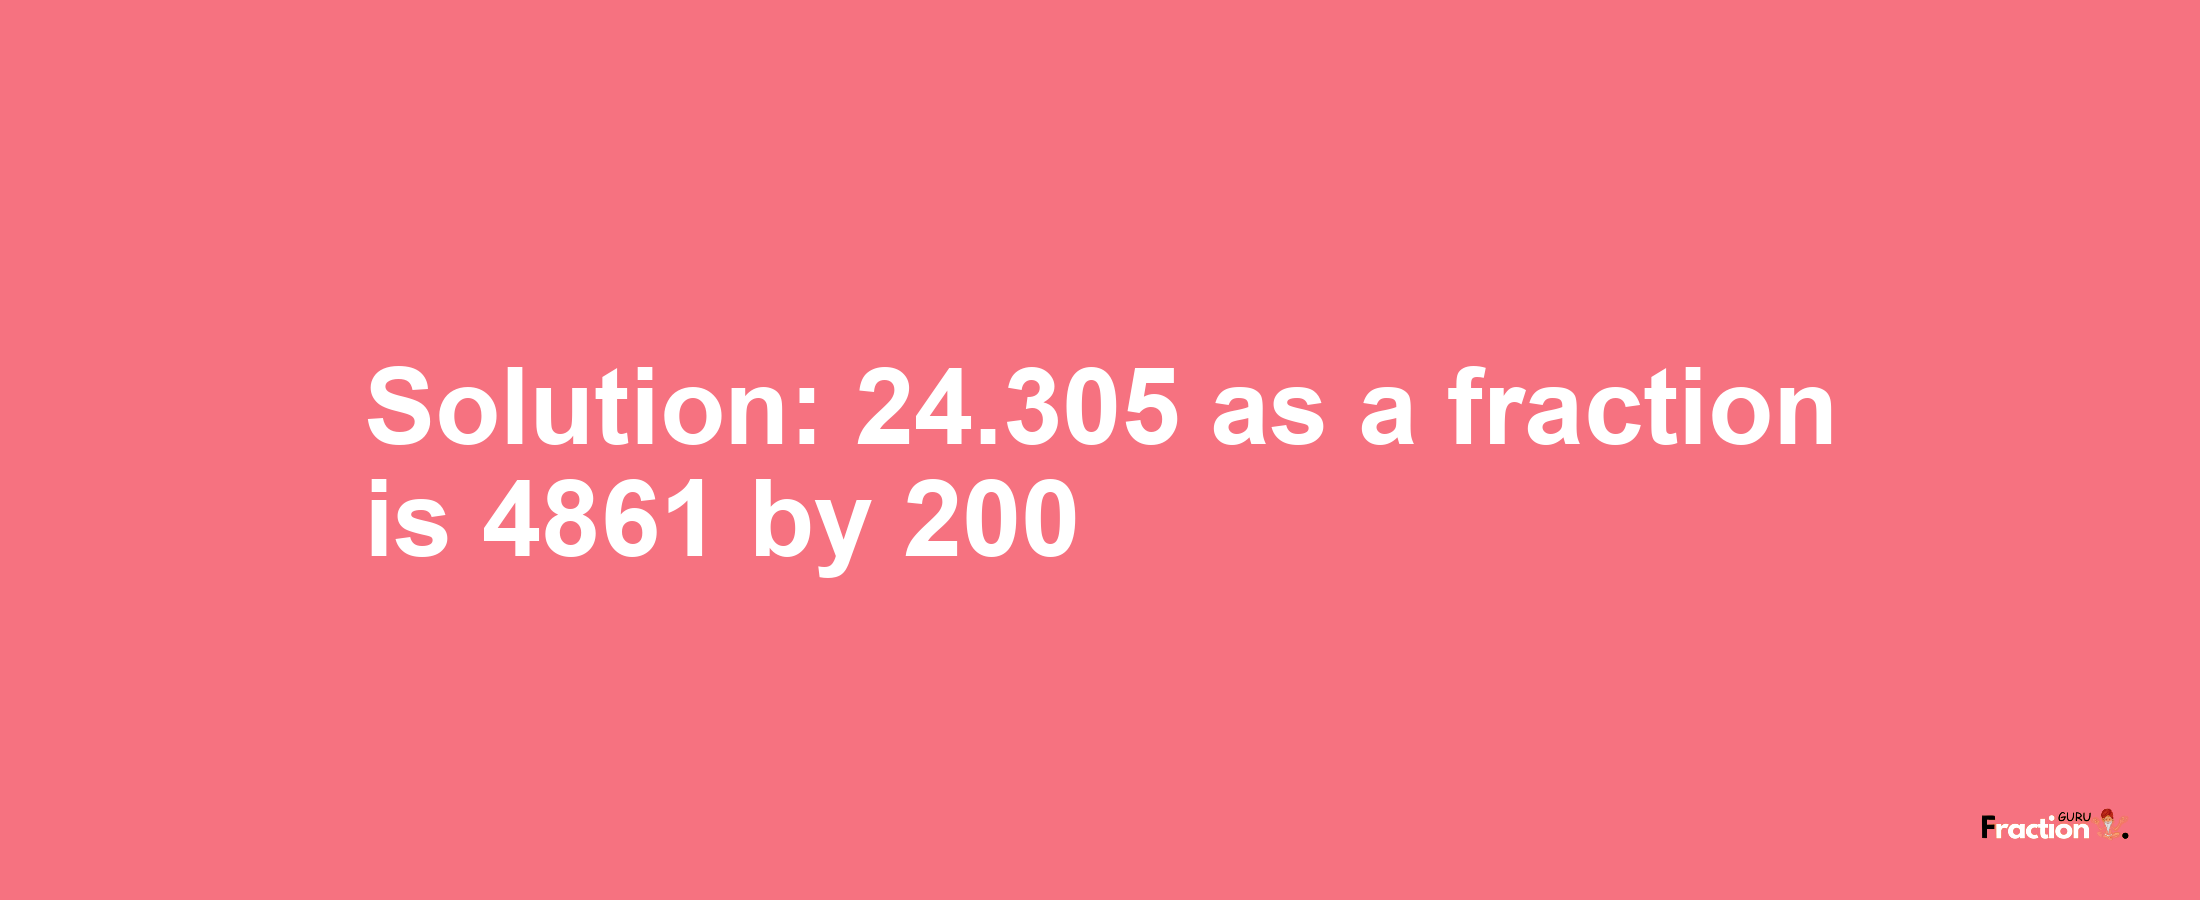 Solution:24.305 as a fraction is 4861/200